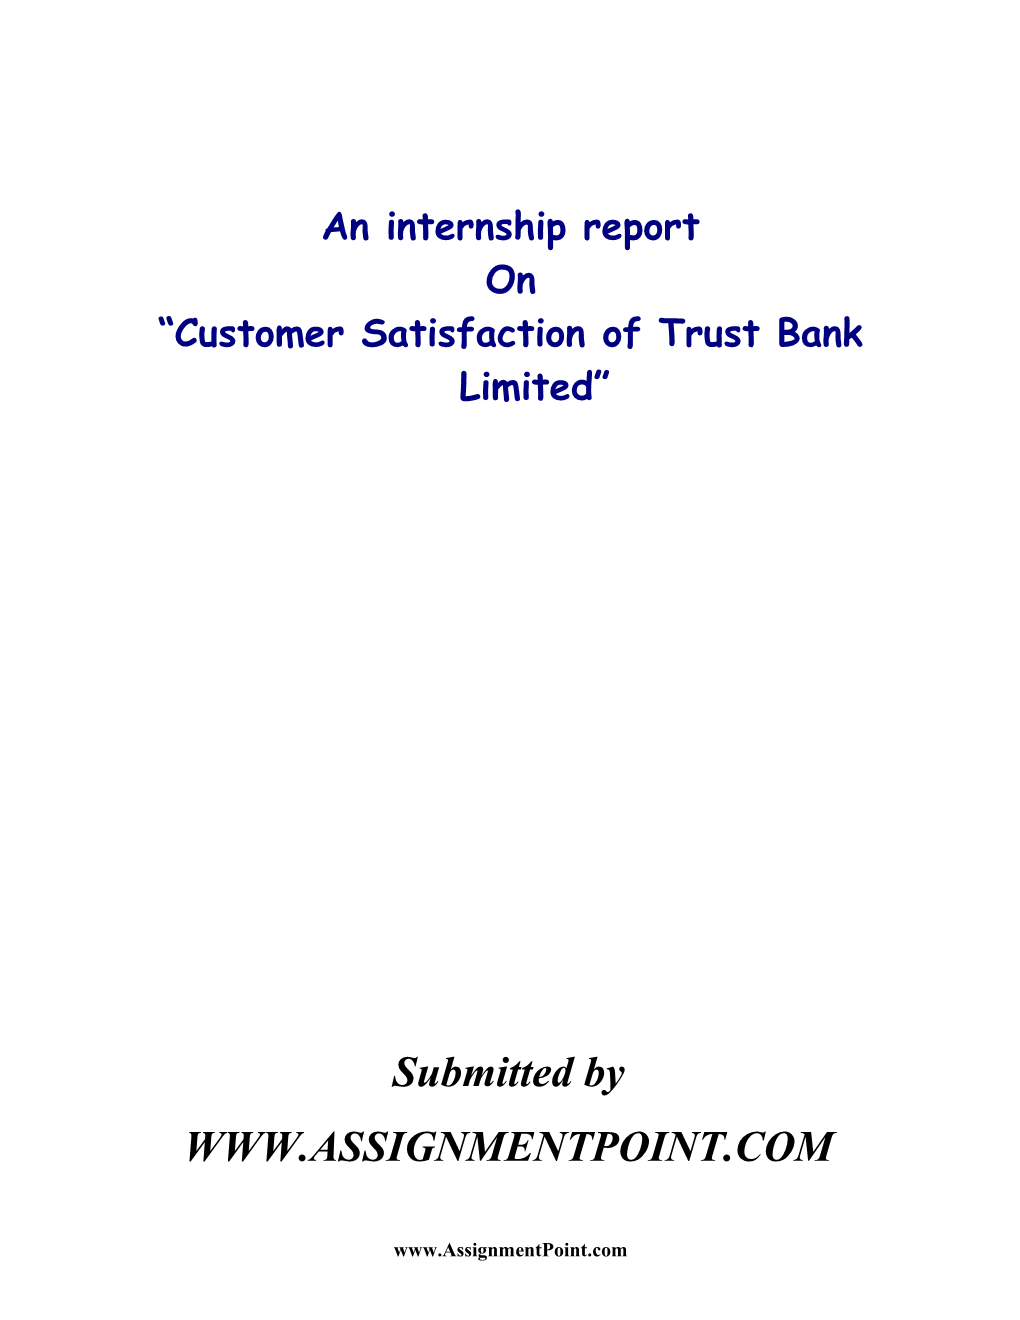 Customer Satisfaction of Trust Bank Limited